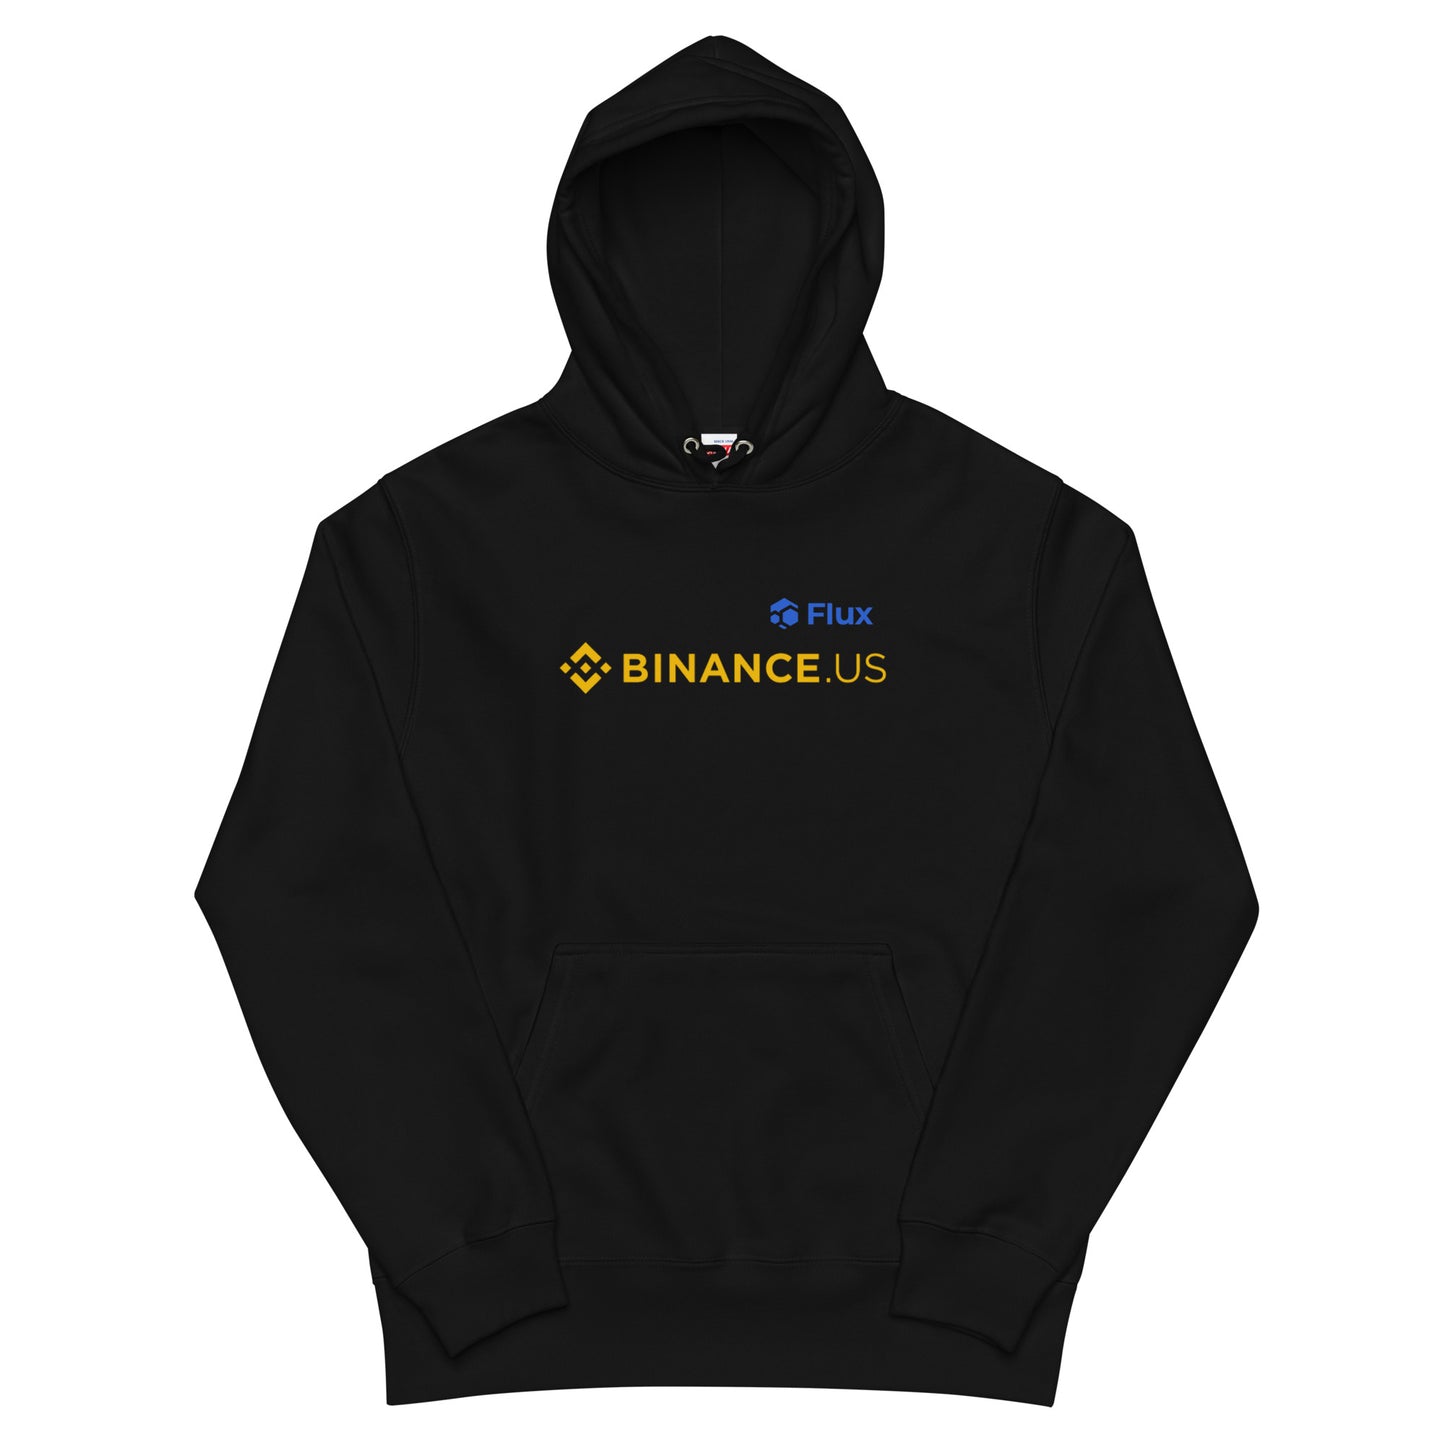 FLUX "Flux x Binance.US" Unisex French Terry Pullover Hoodie